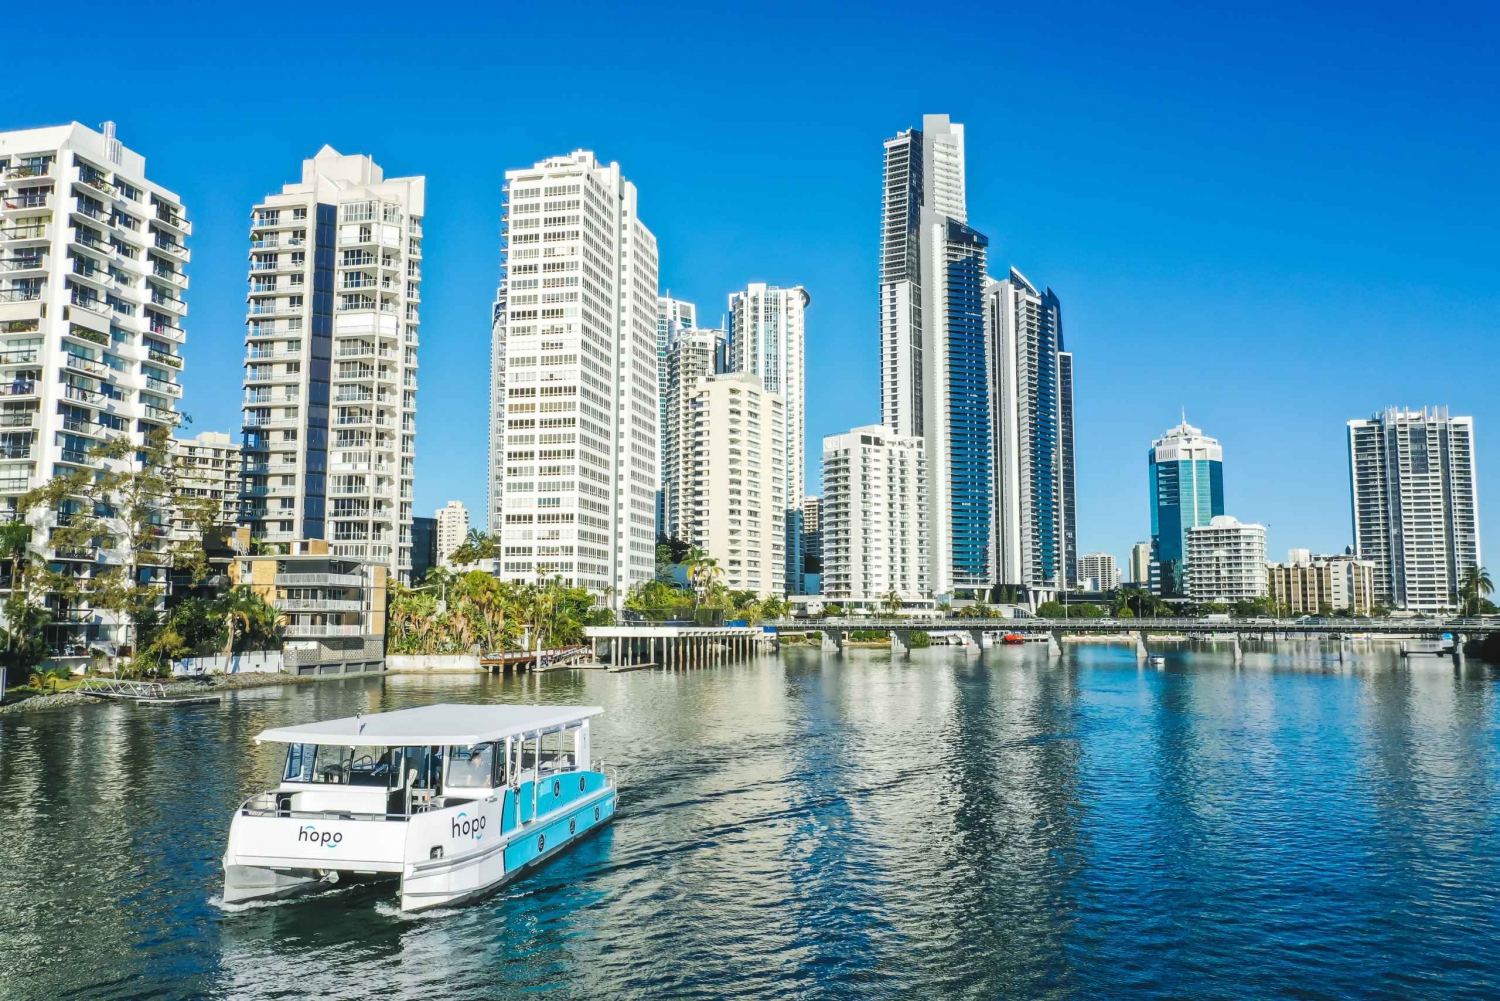 Surfers Paradise: Hop-on Hop-off Sightseeing Cruise